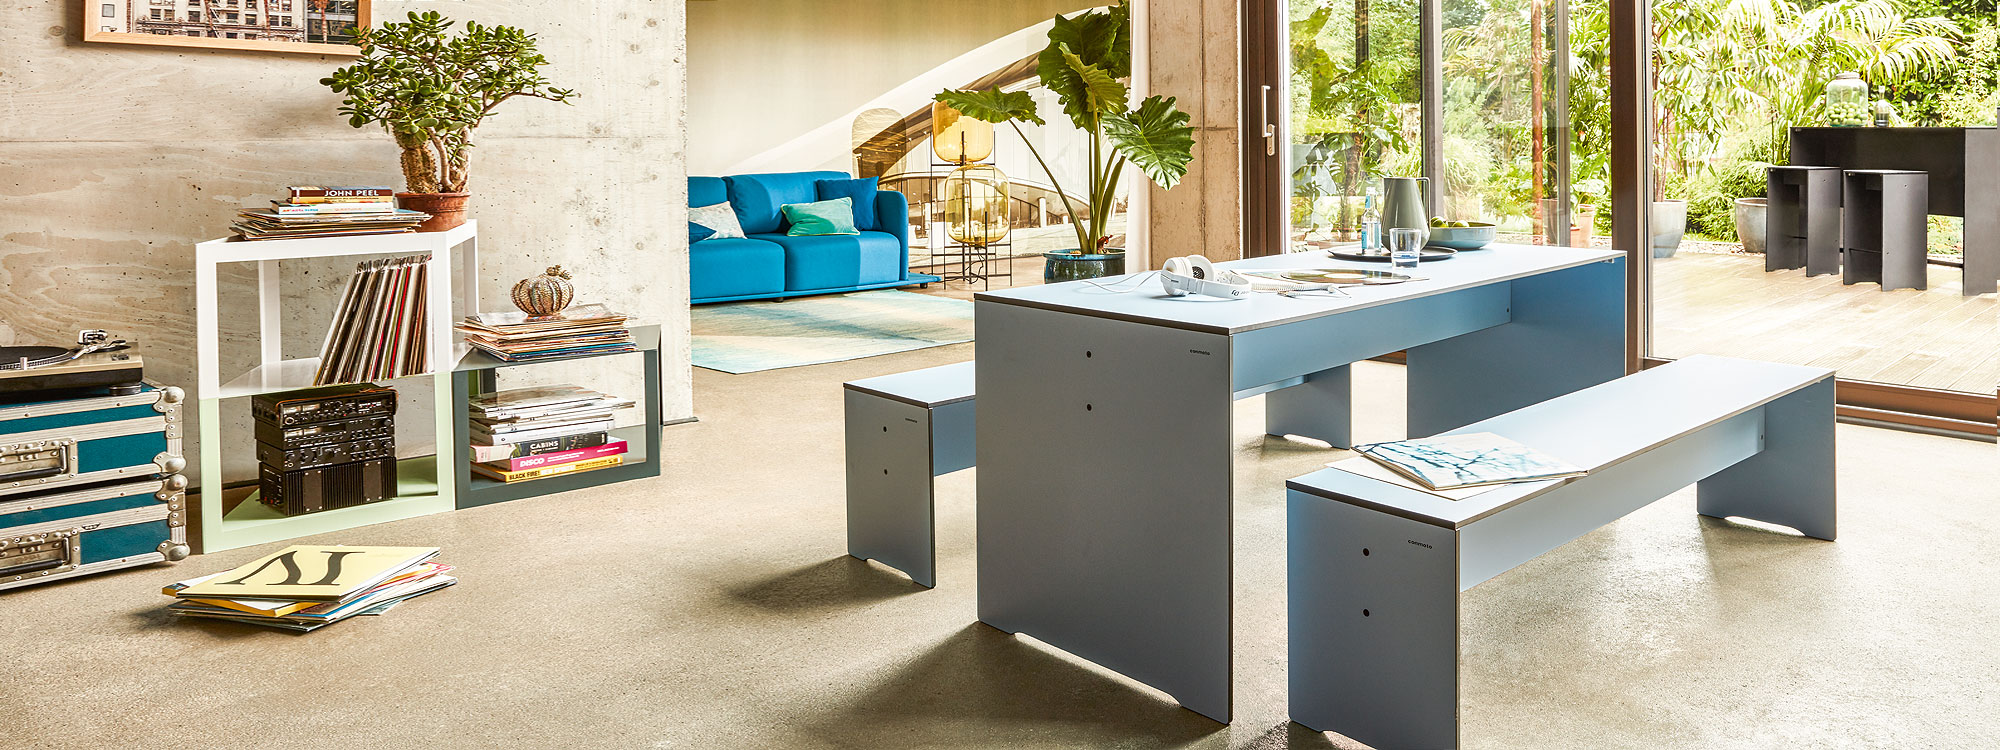 Image of RIVA white table and benches by Conmoto, shown in modern house